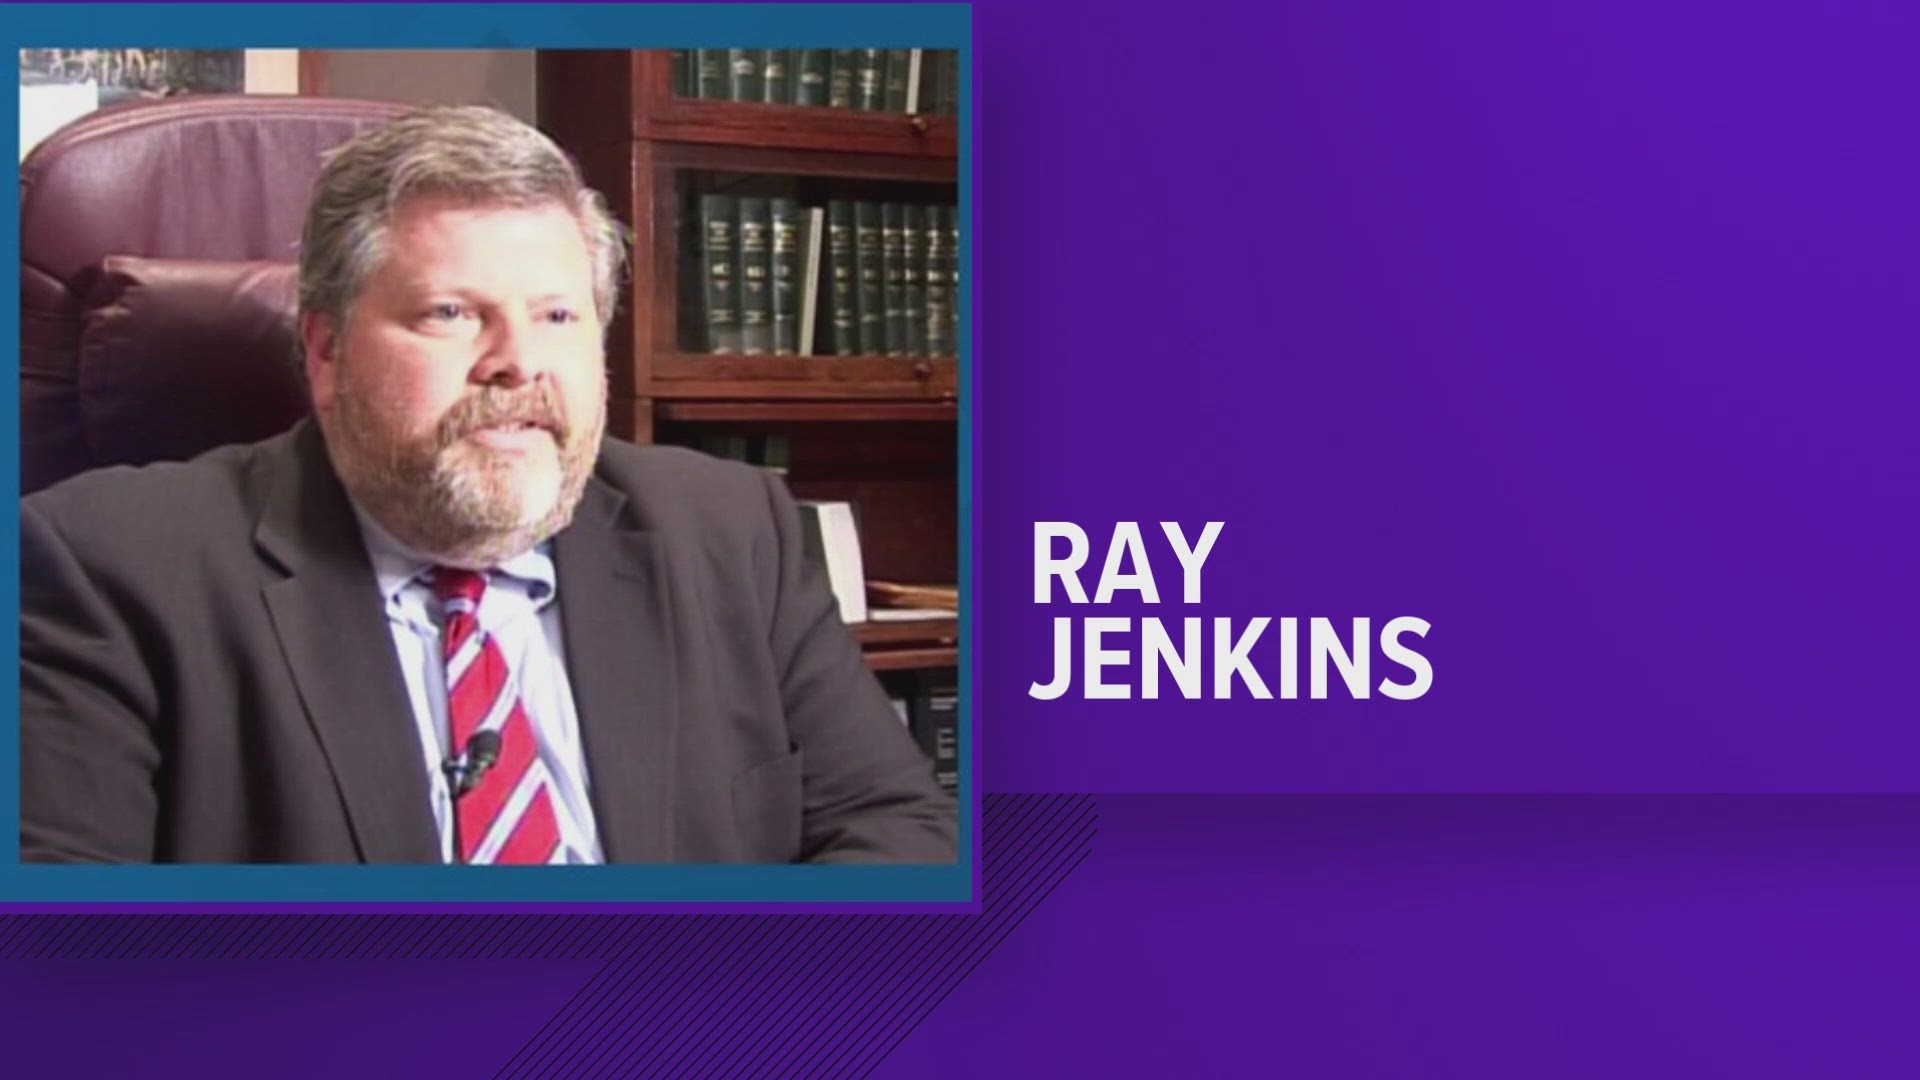 Judges have nominated Spencer Warren Reed and Troy Jones as candidates to replace Ray Jenkins.